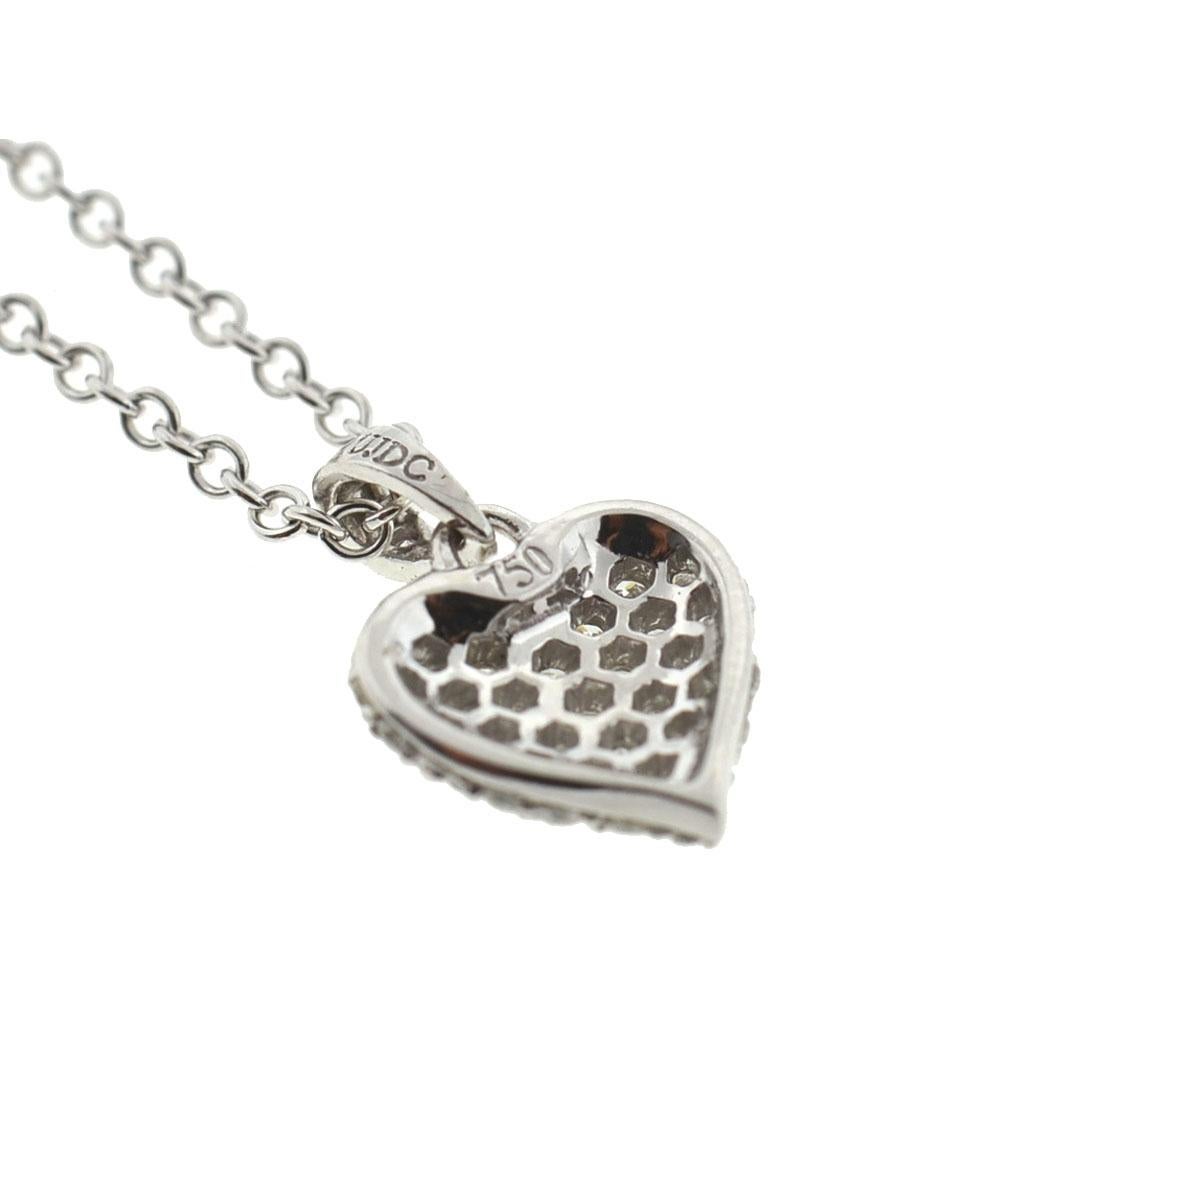 18 Karat White Gold Heart Pave Necklace with Fine Chain Necklace .48 Carat 1